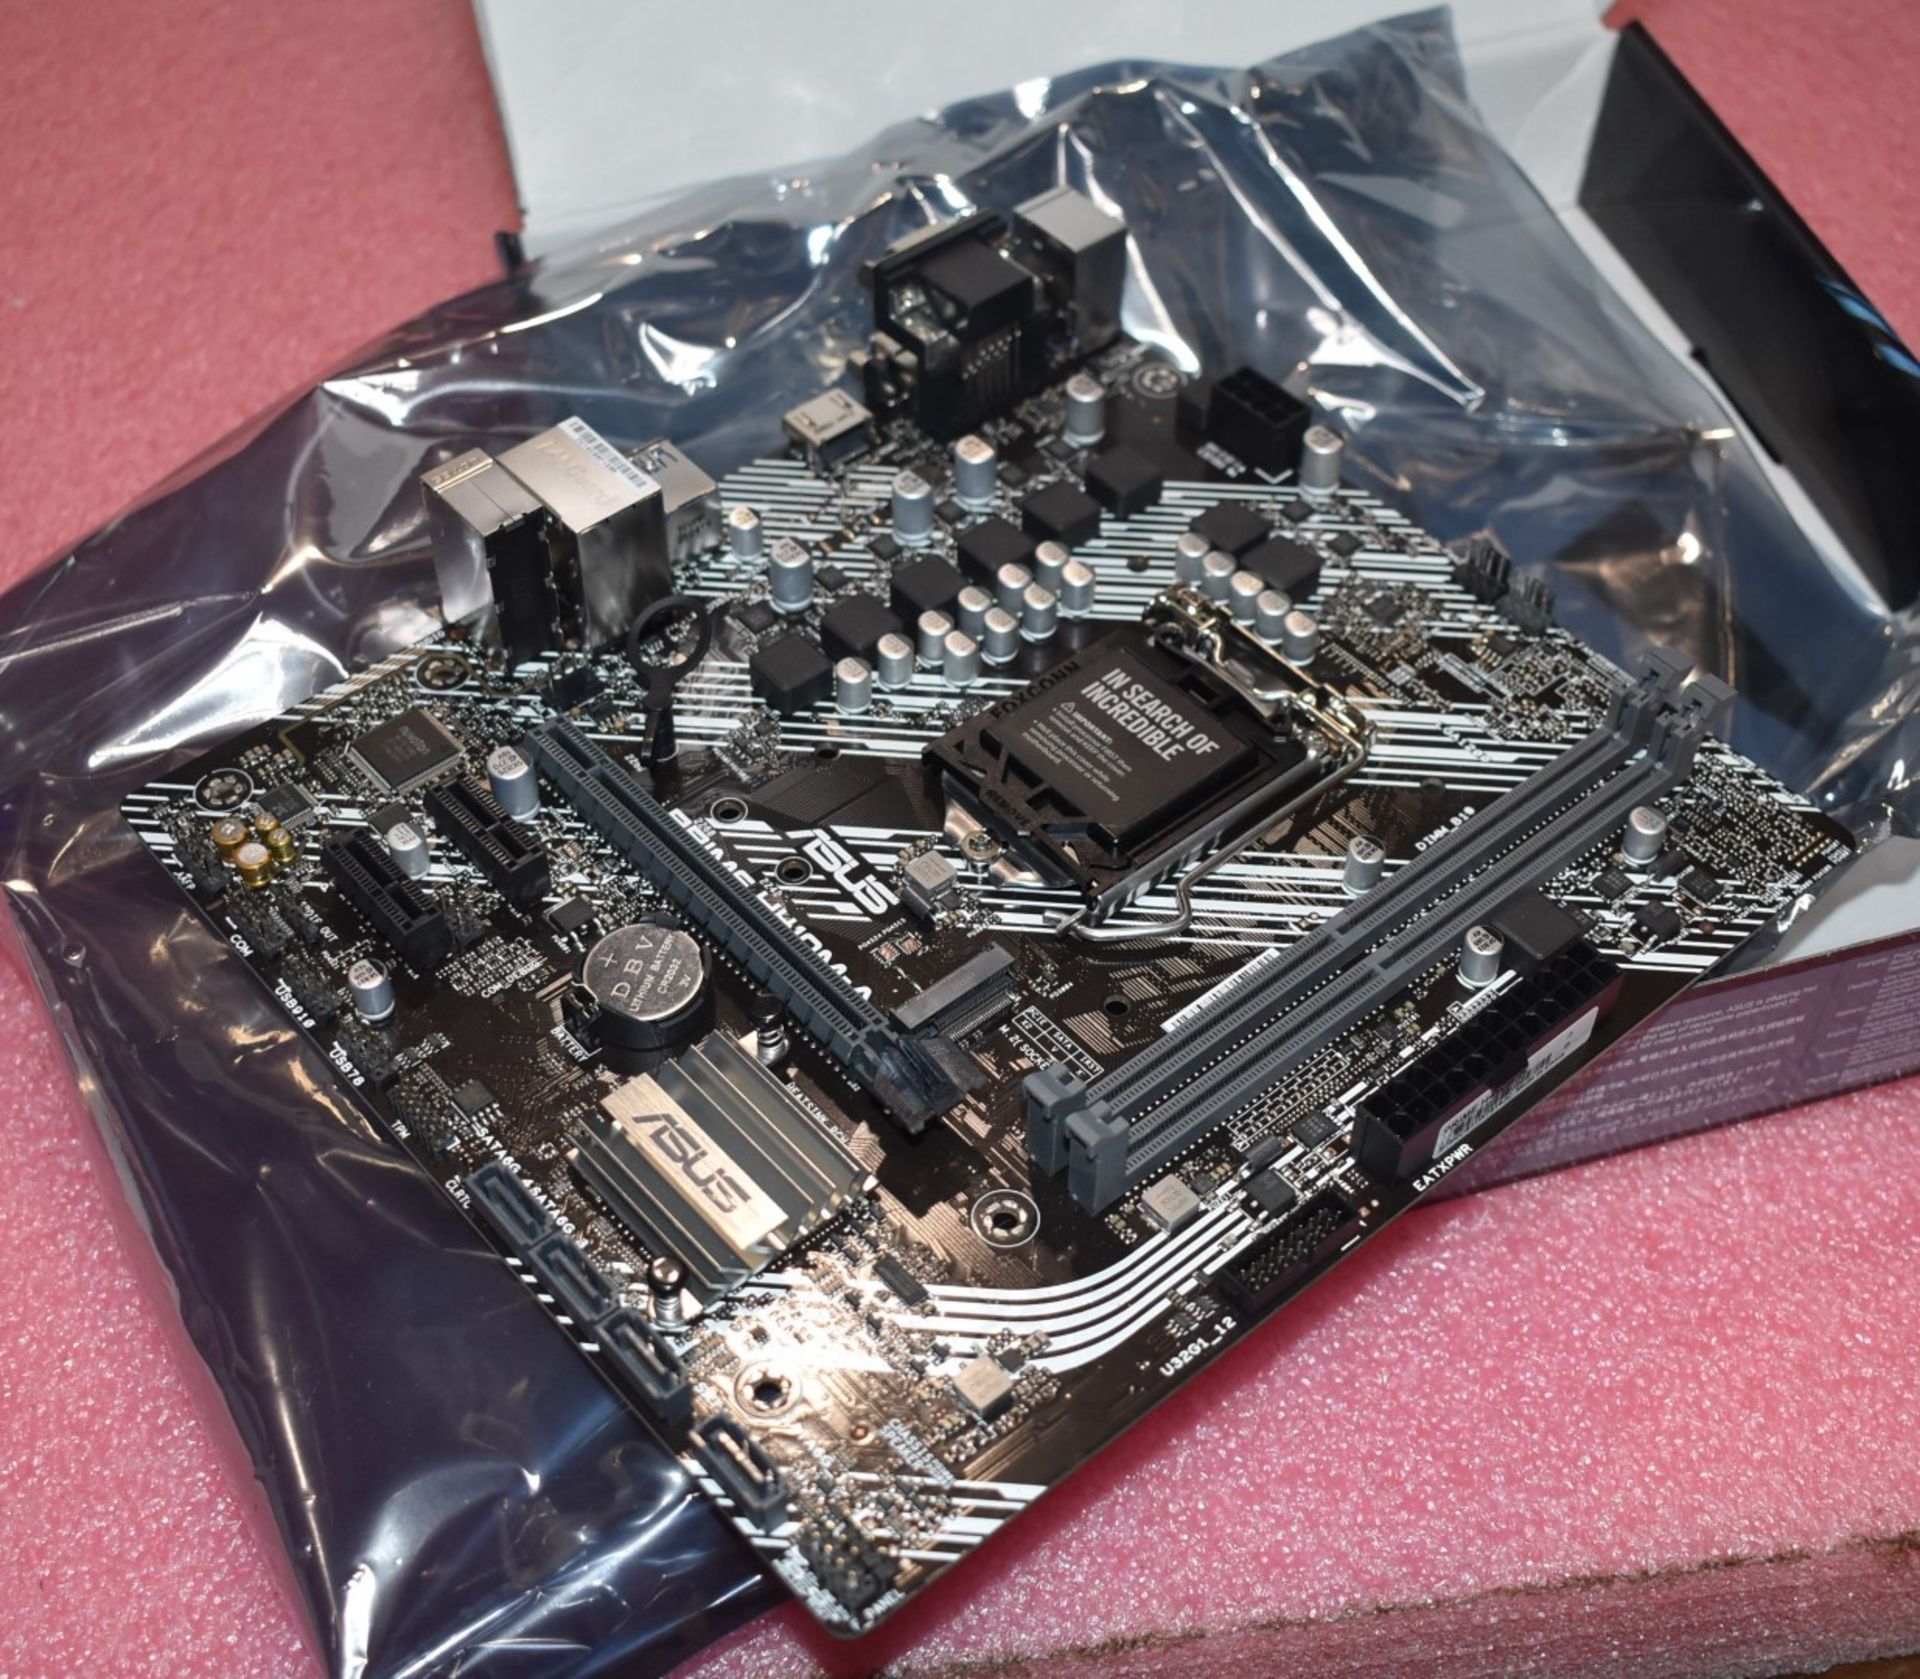 1 x Asus Prime H410M-A Intel LGA1200 Motherboard - Boxed With Accessories - Image 2 of 4